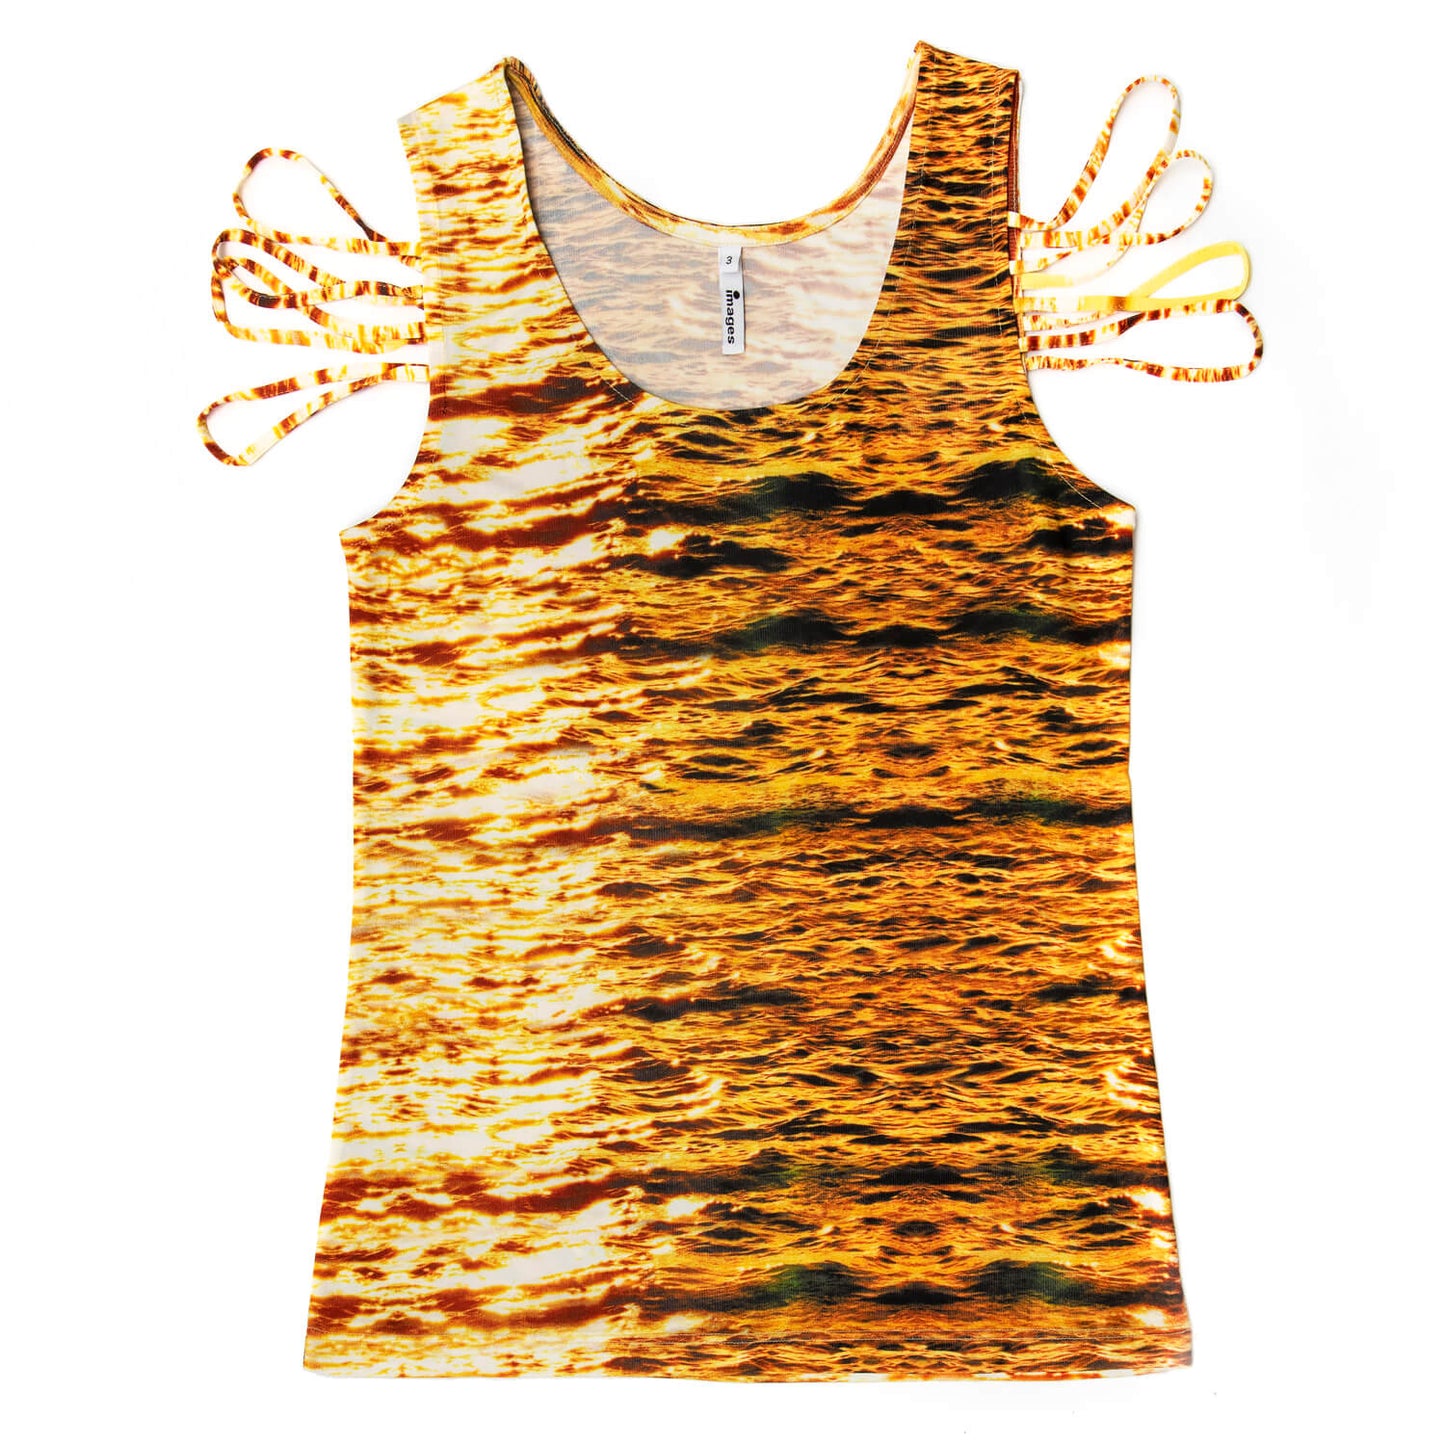 flat lay midas touch gold silk jersey strappy top all water print